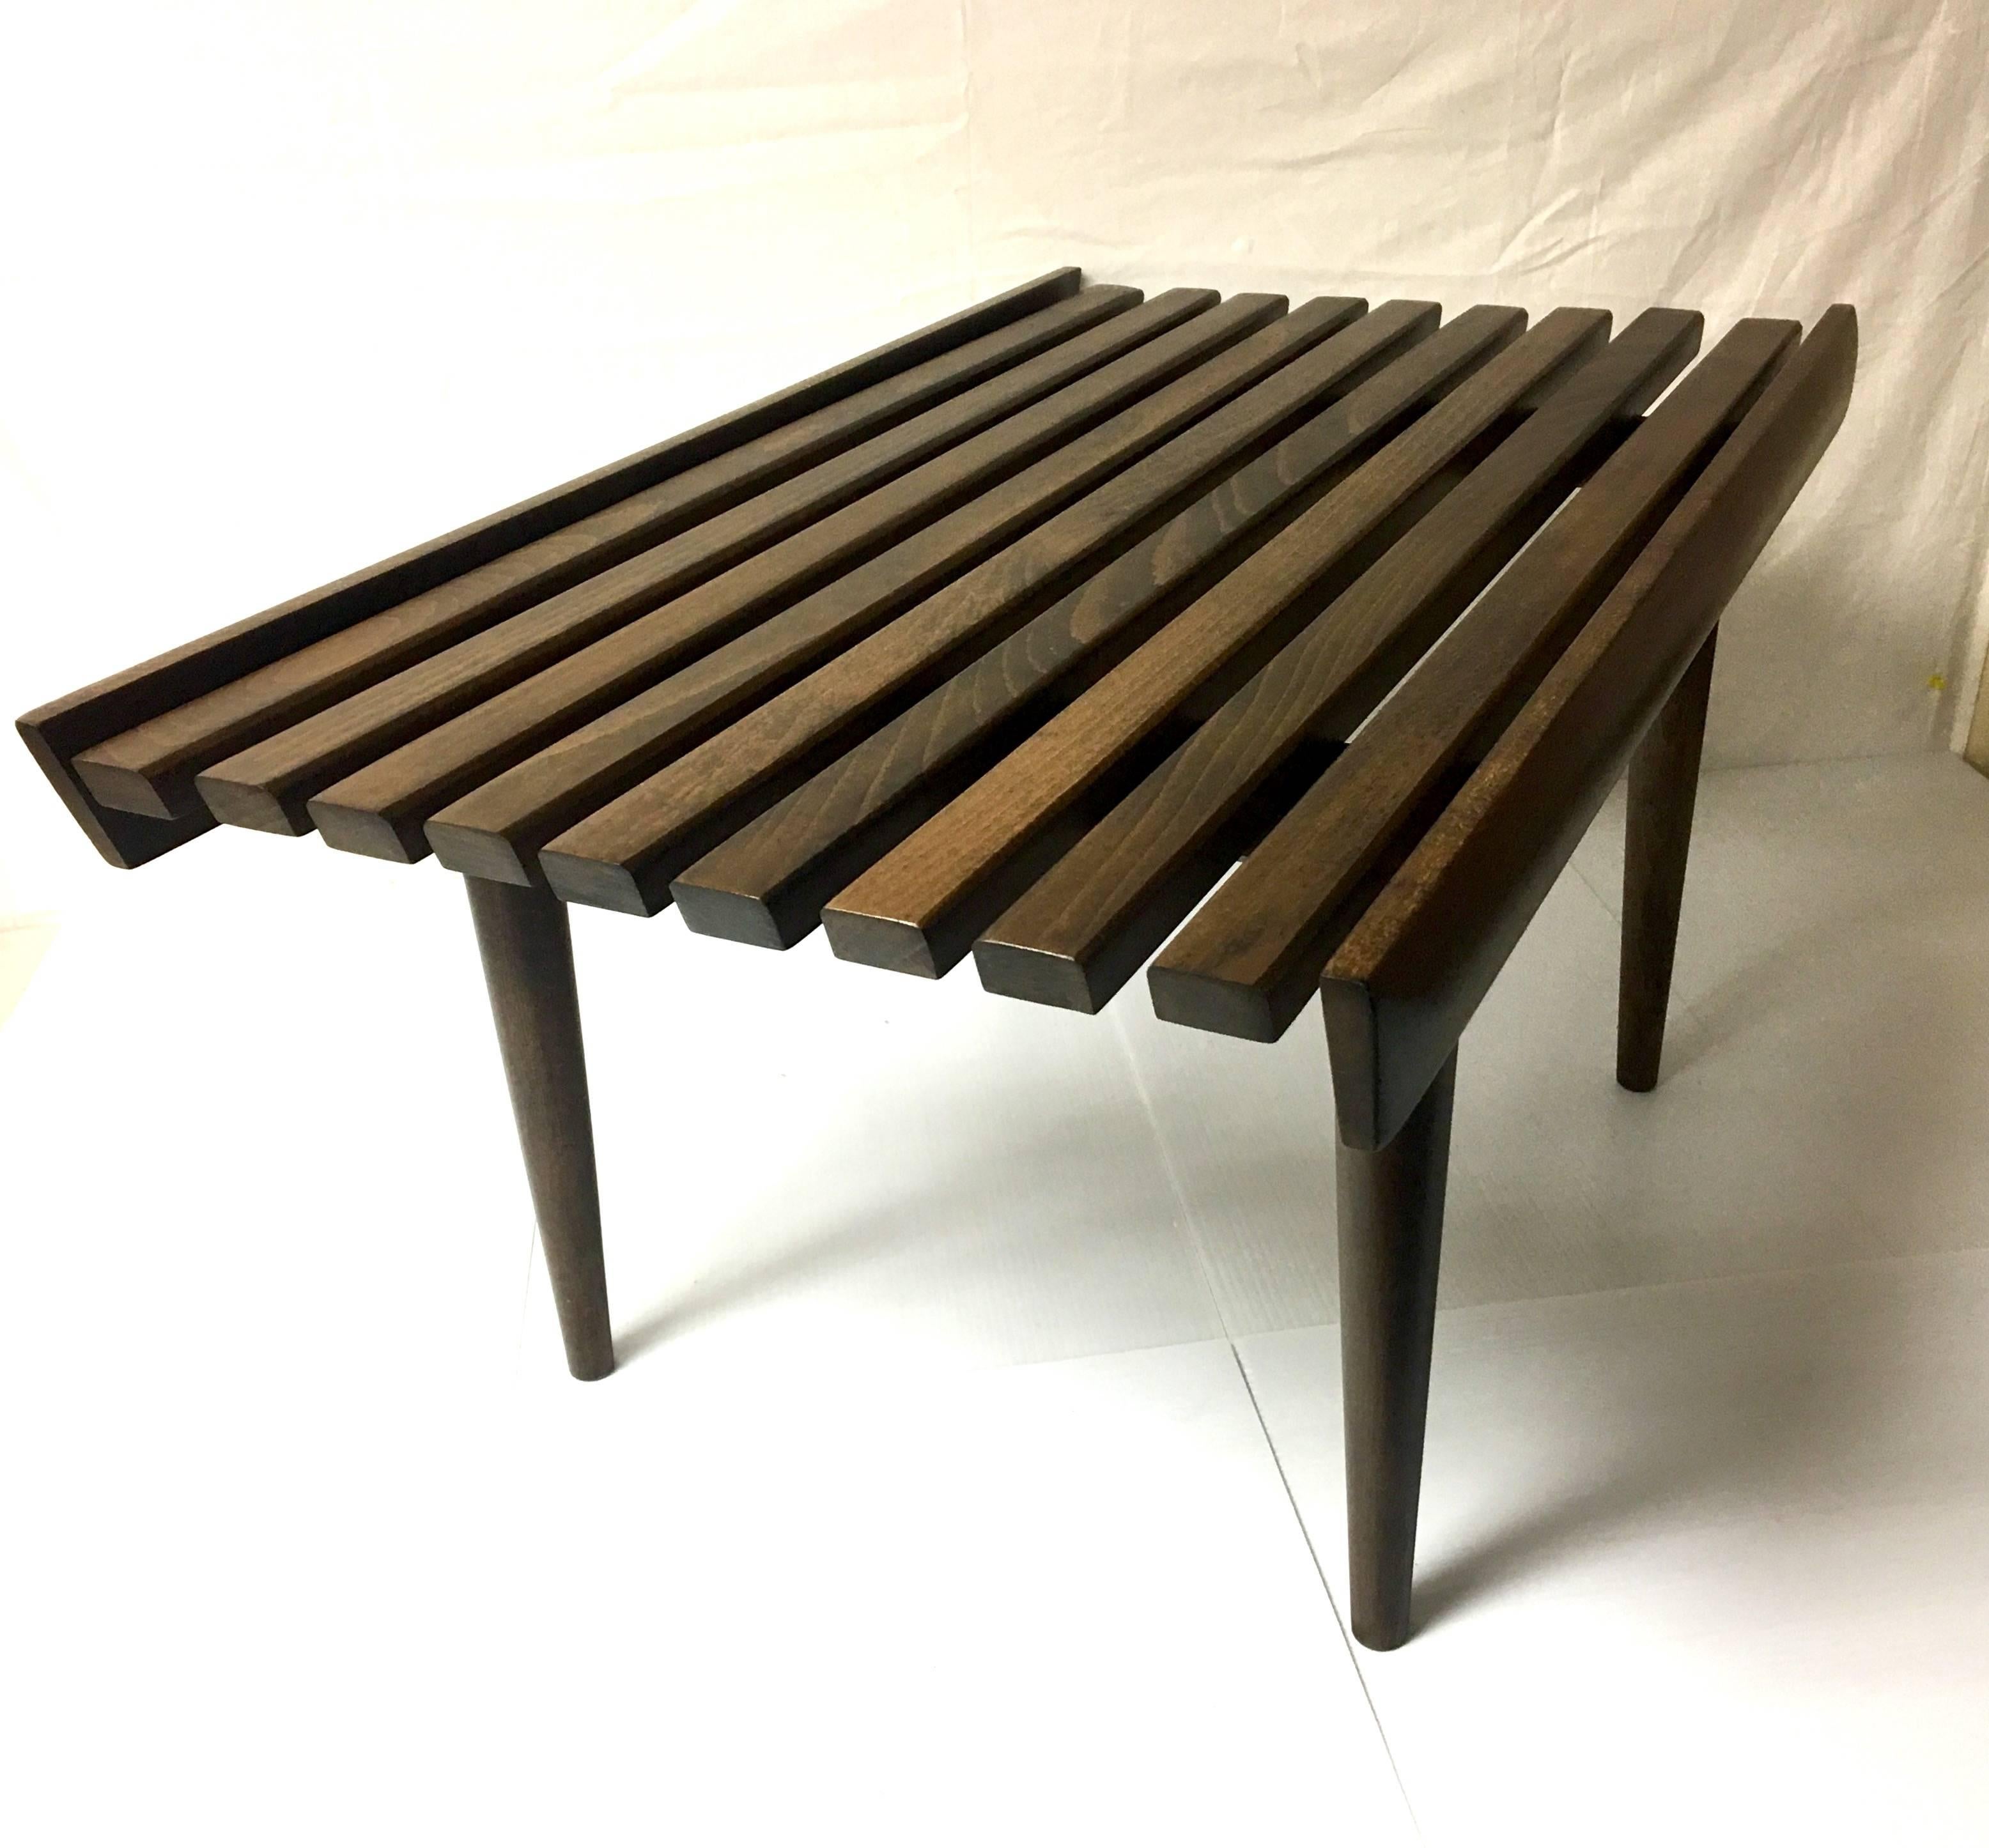 Elegant Japanese style small slat bench, circa 1950s, freshly refinished in walnut. The piece is solid and sturdy with tapered legs that can be removed for easy storage or shipping. Nice angle edge end cut; can be used for seating or as small coffee